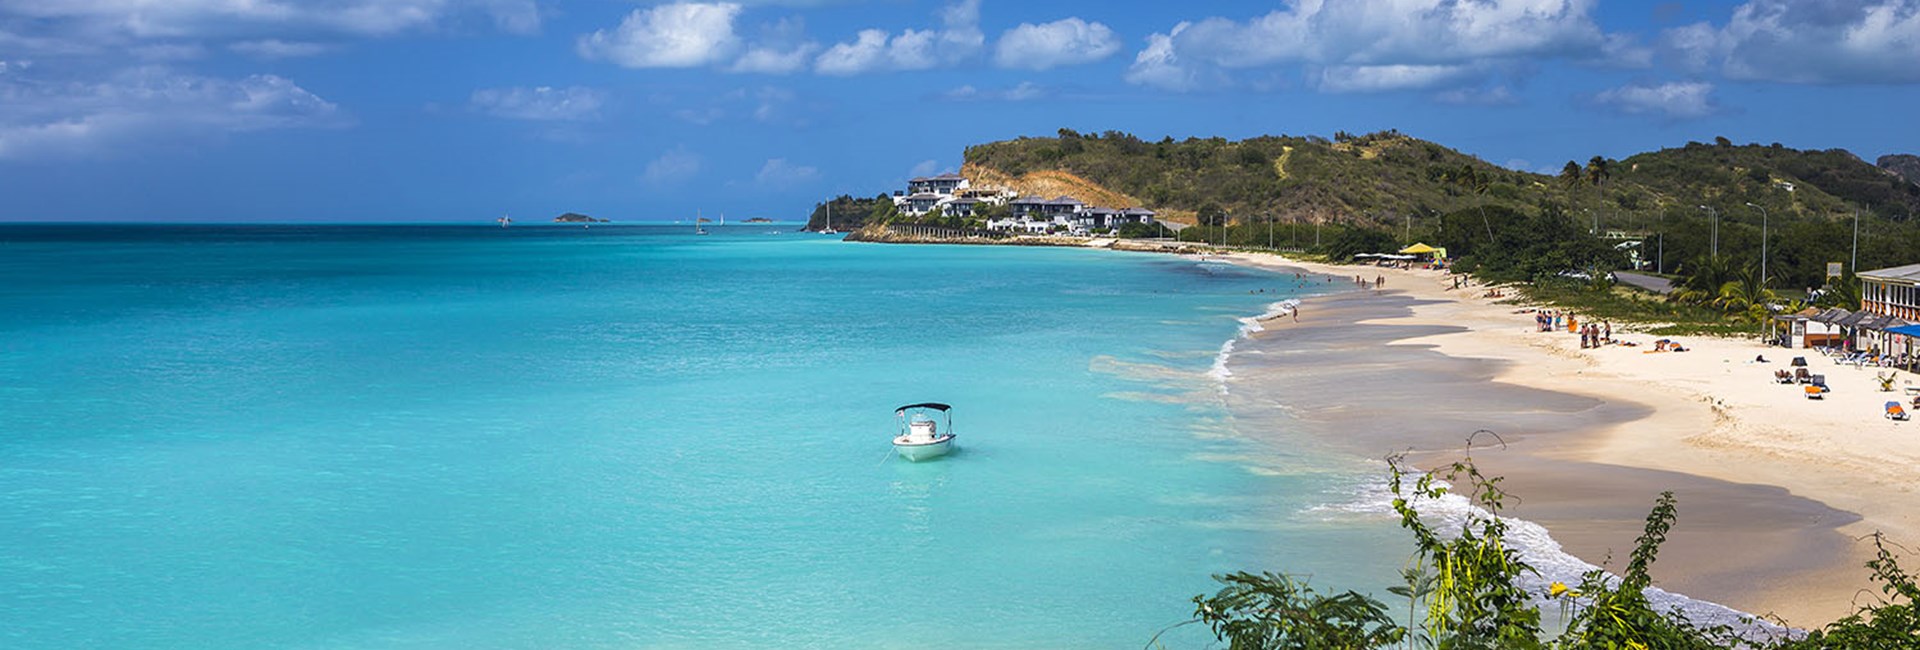 Tropical beach at Antigua with white sand, turquoise sea and blue sky